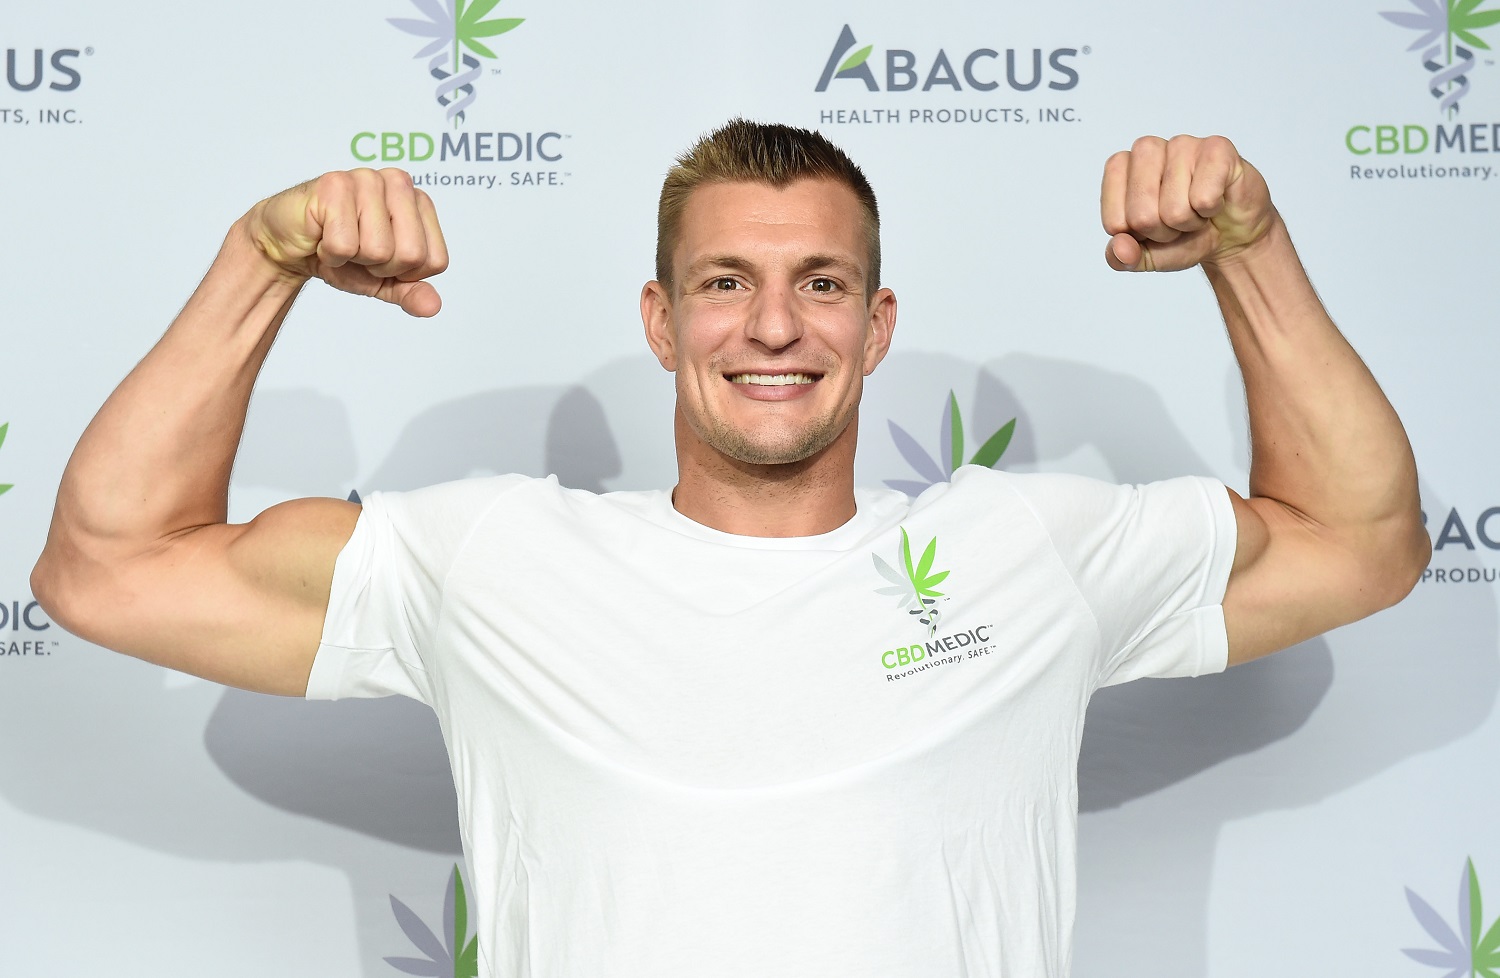 Rob Gronkowski announces his partnership with Abacus Health Products on Aug. 27, 2019, in New York City.